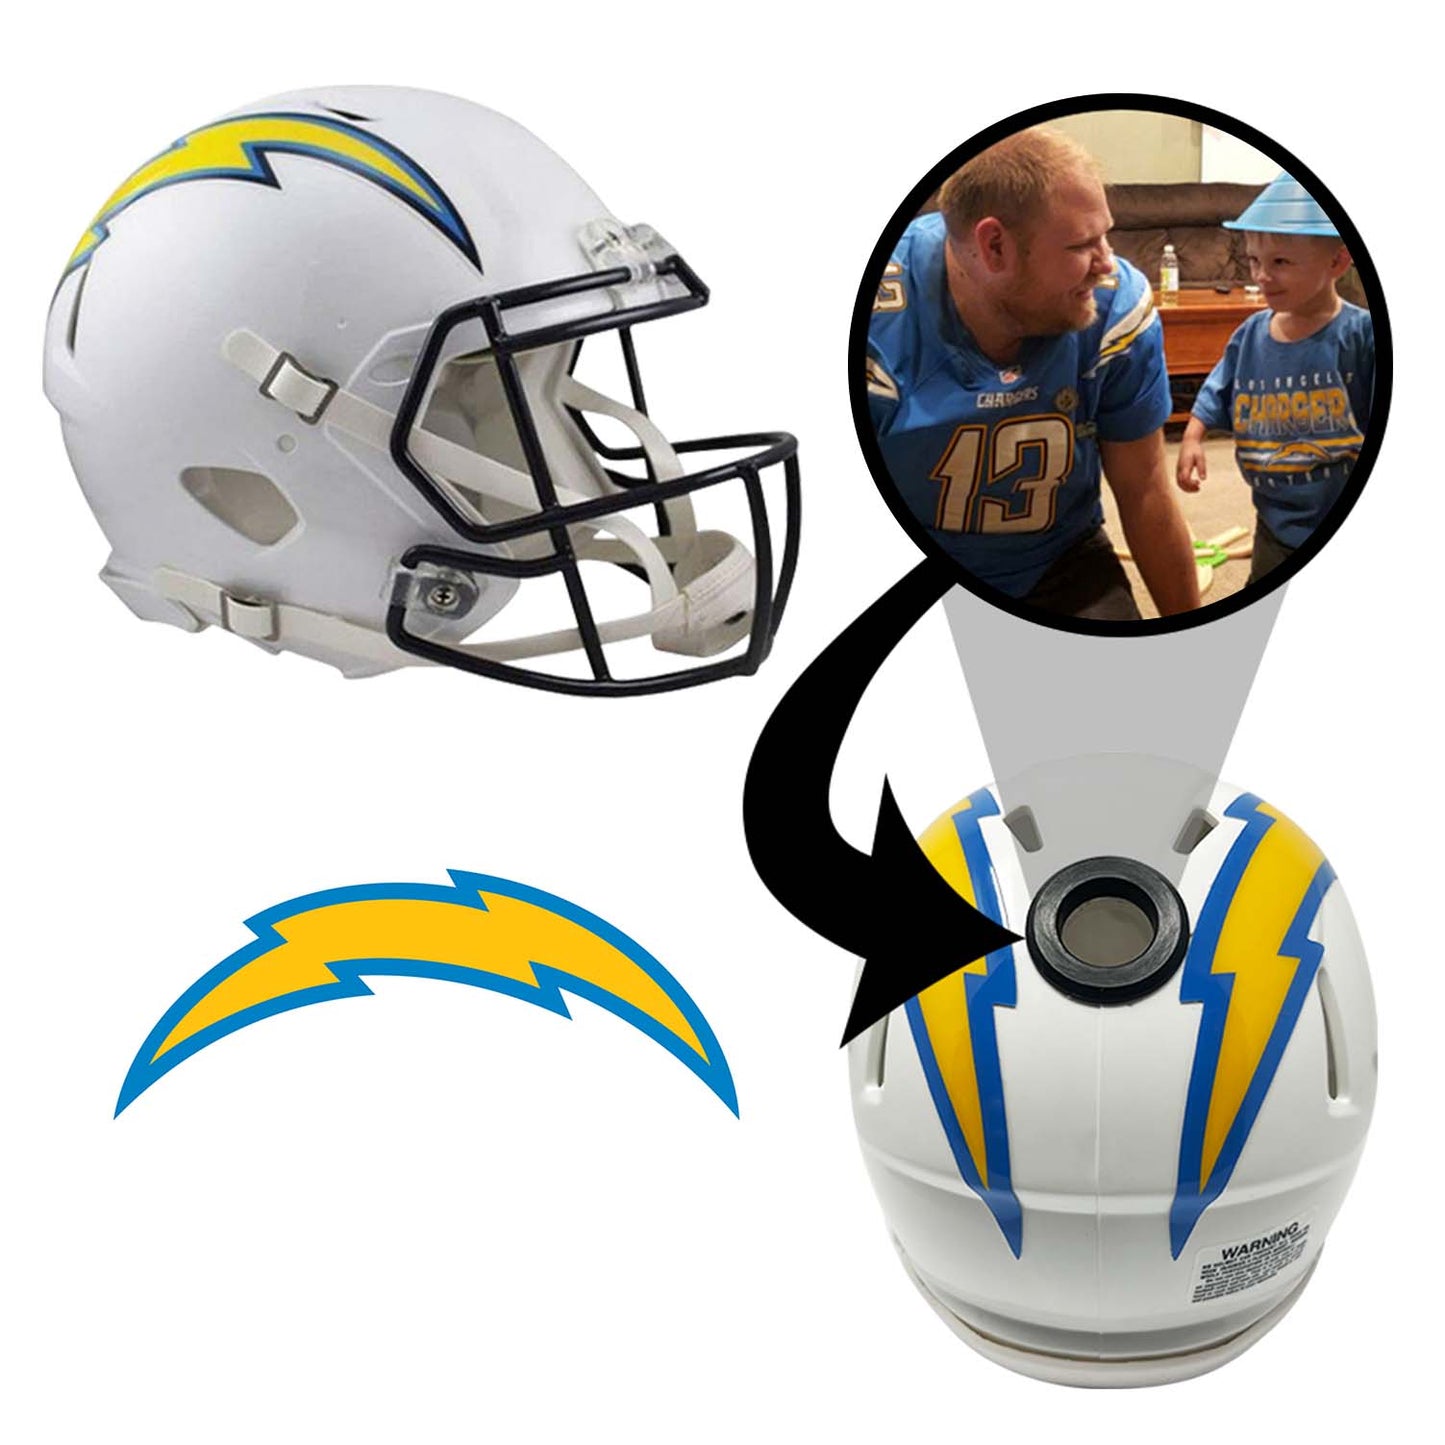 Los Angeles Chargers NFL Collectible Mini Helmet - Picture Inside - FANZ Collectibles